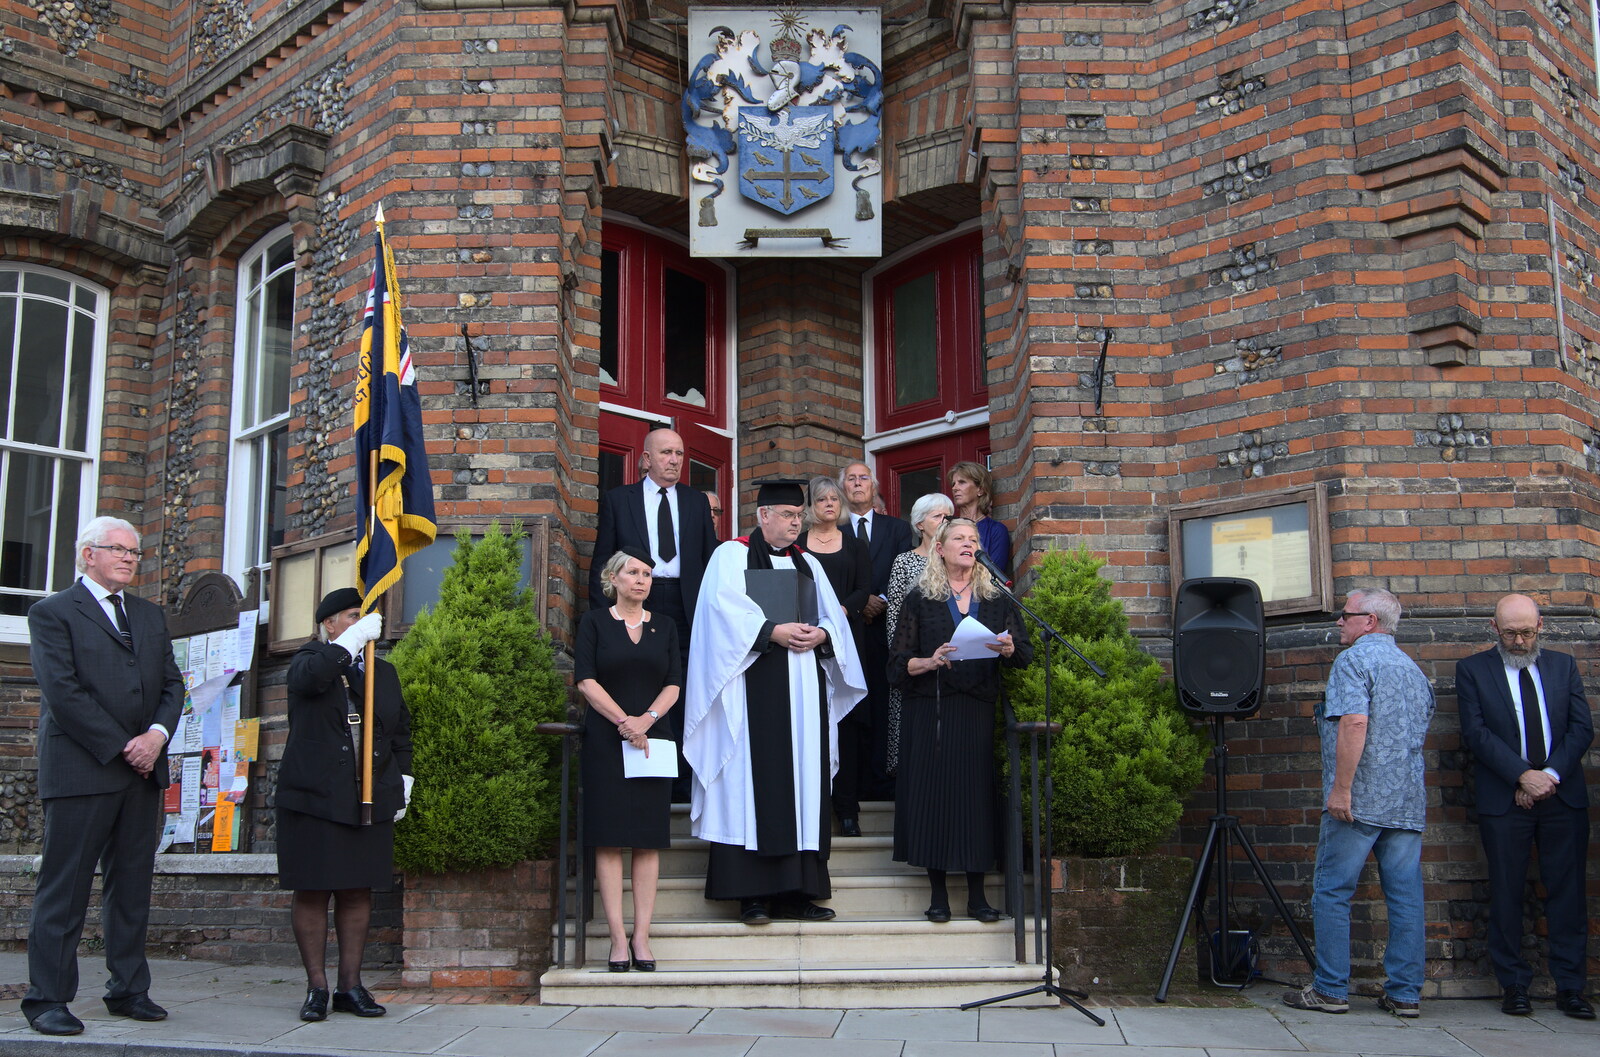 Italian Cars and a Royal Proclamation, Eye, Suffolk - 11th September 2022: The official proclamation is read out